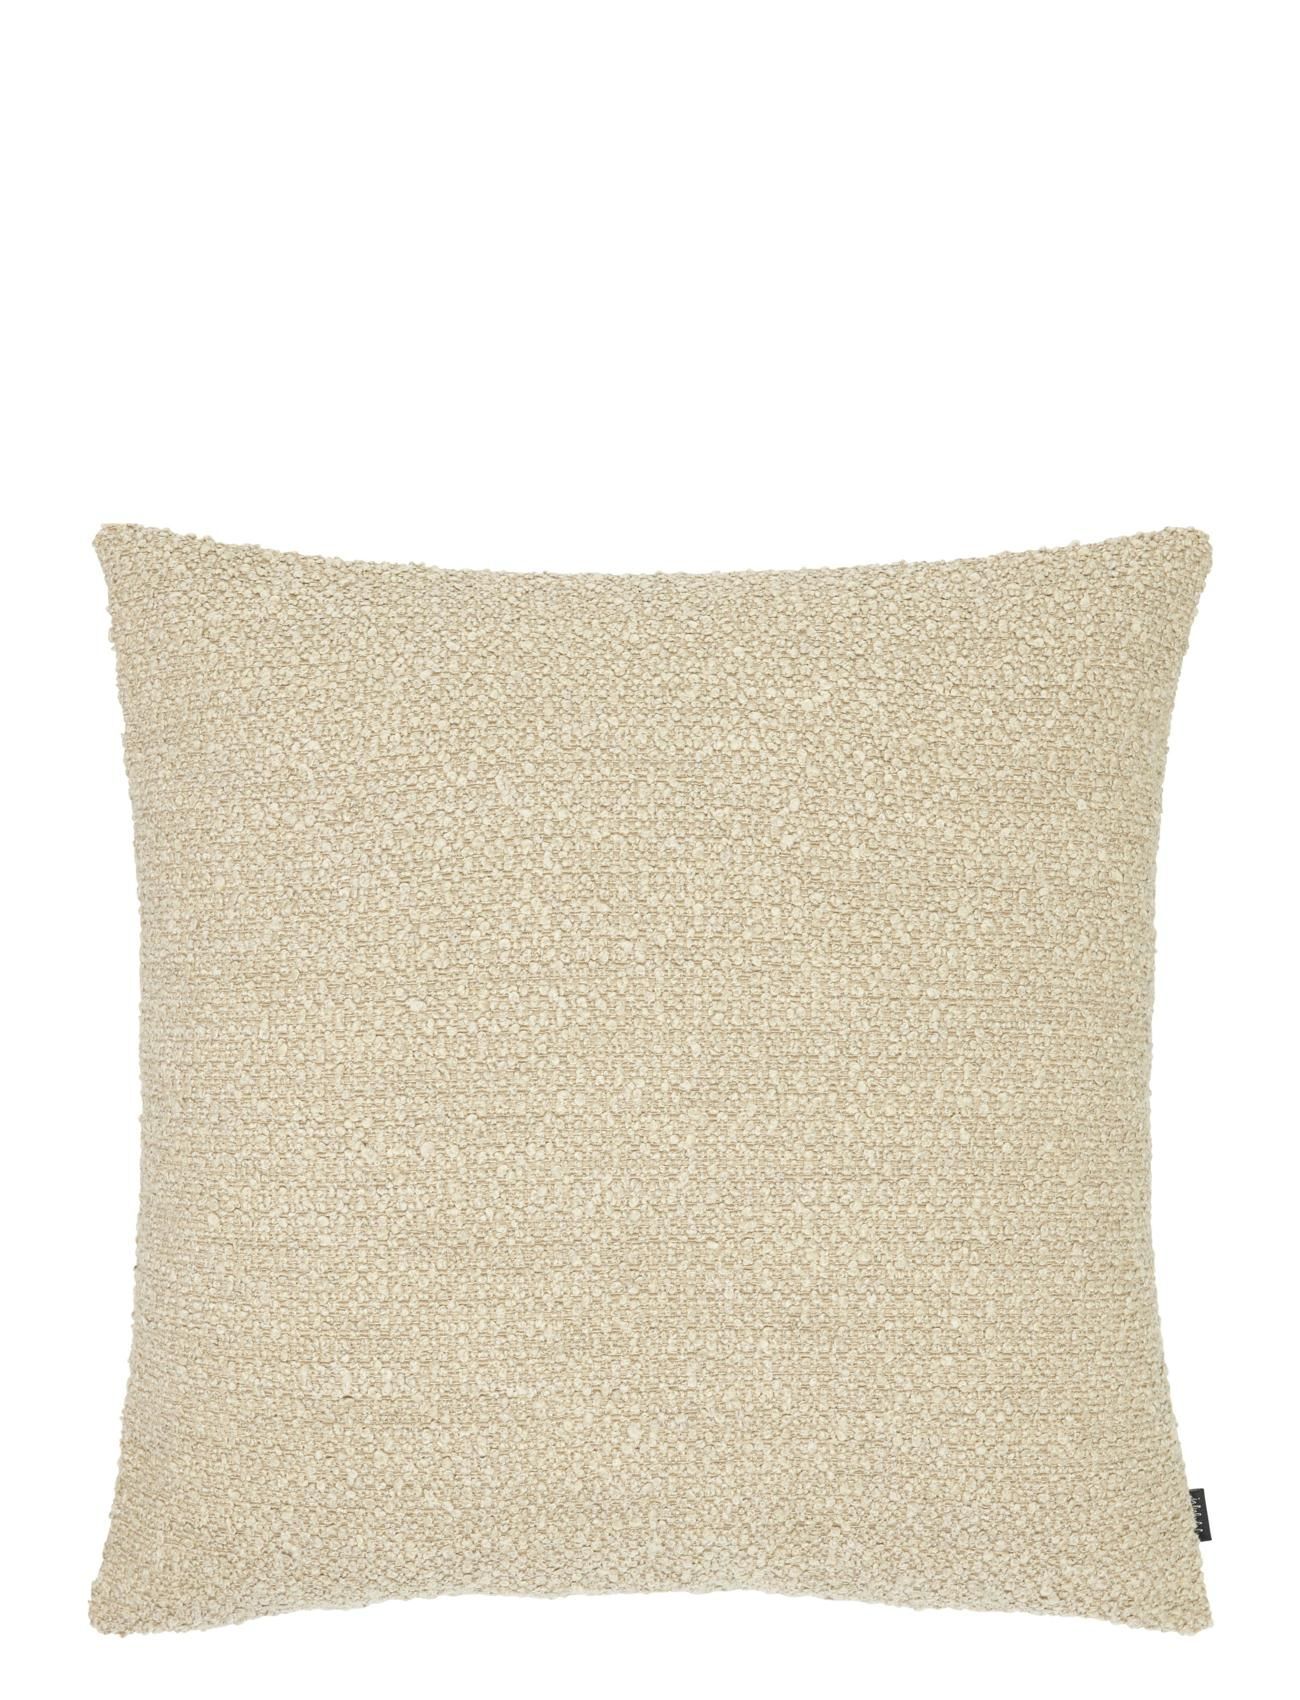 Jakobsdals Boucle Moment Cushion Cover Home Textiles Cushions & Blankets Cushion Covers Beige Jakobsdals